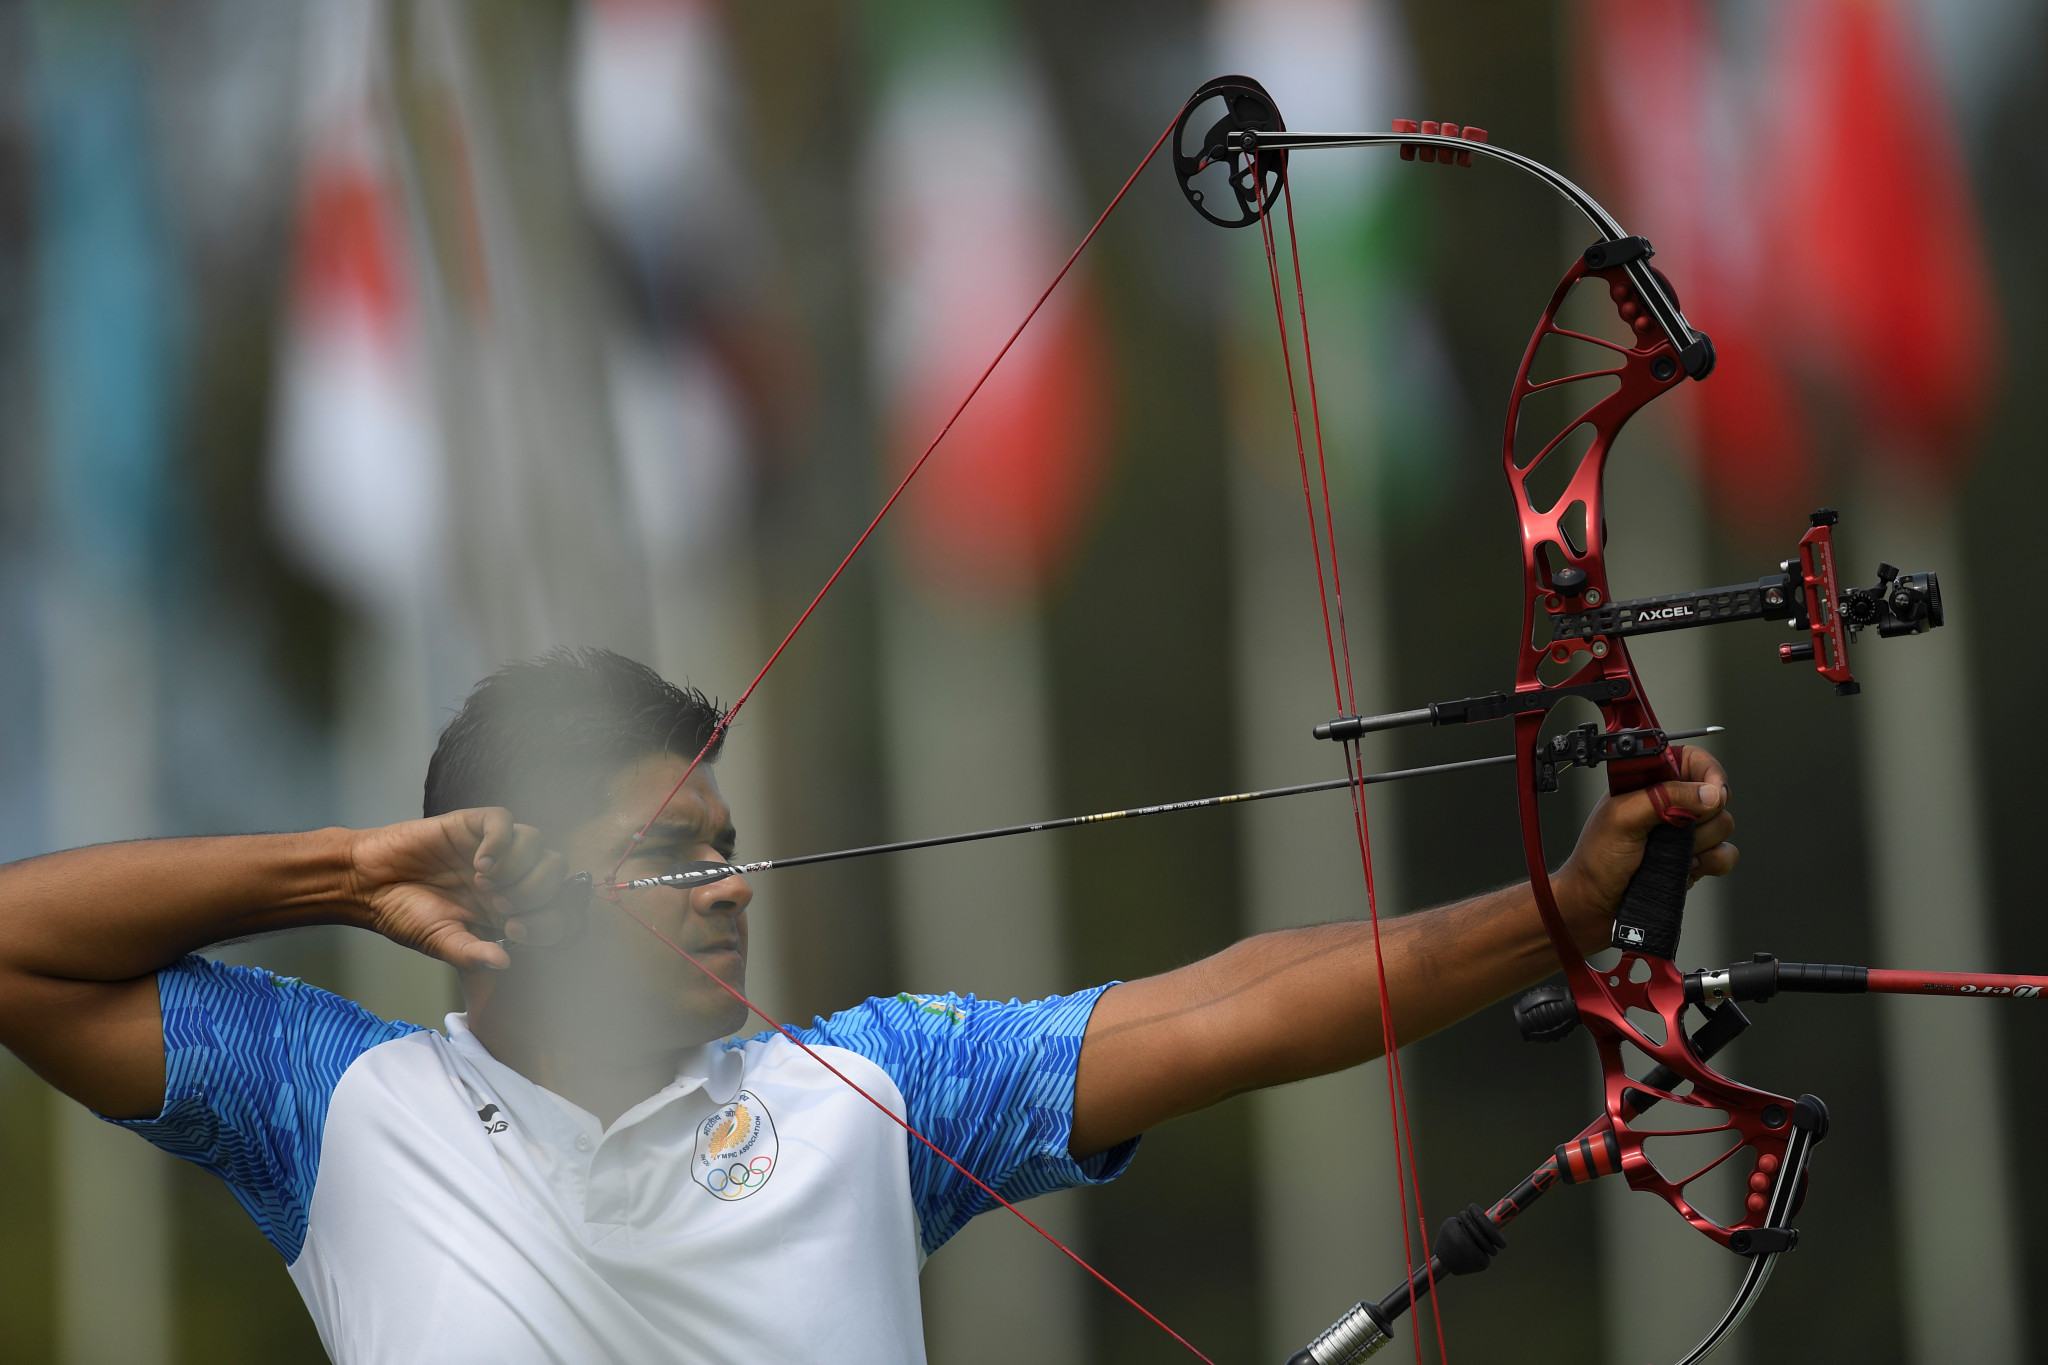 Aman Saini played a part for India to deny Bangladesh a third medal at the day's action in the Asian Archery Championships ©Getty Images